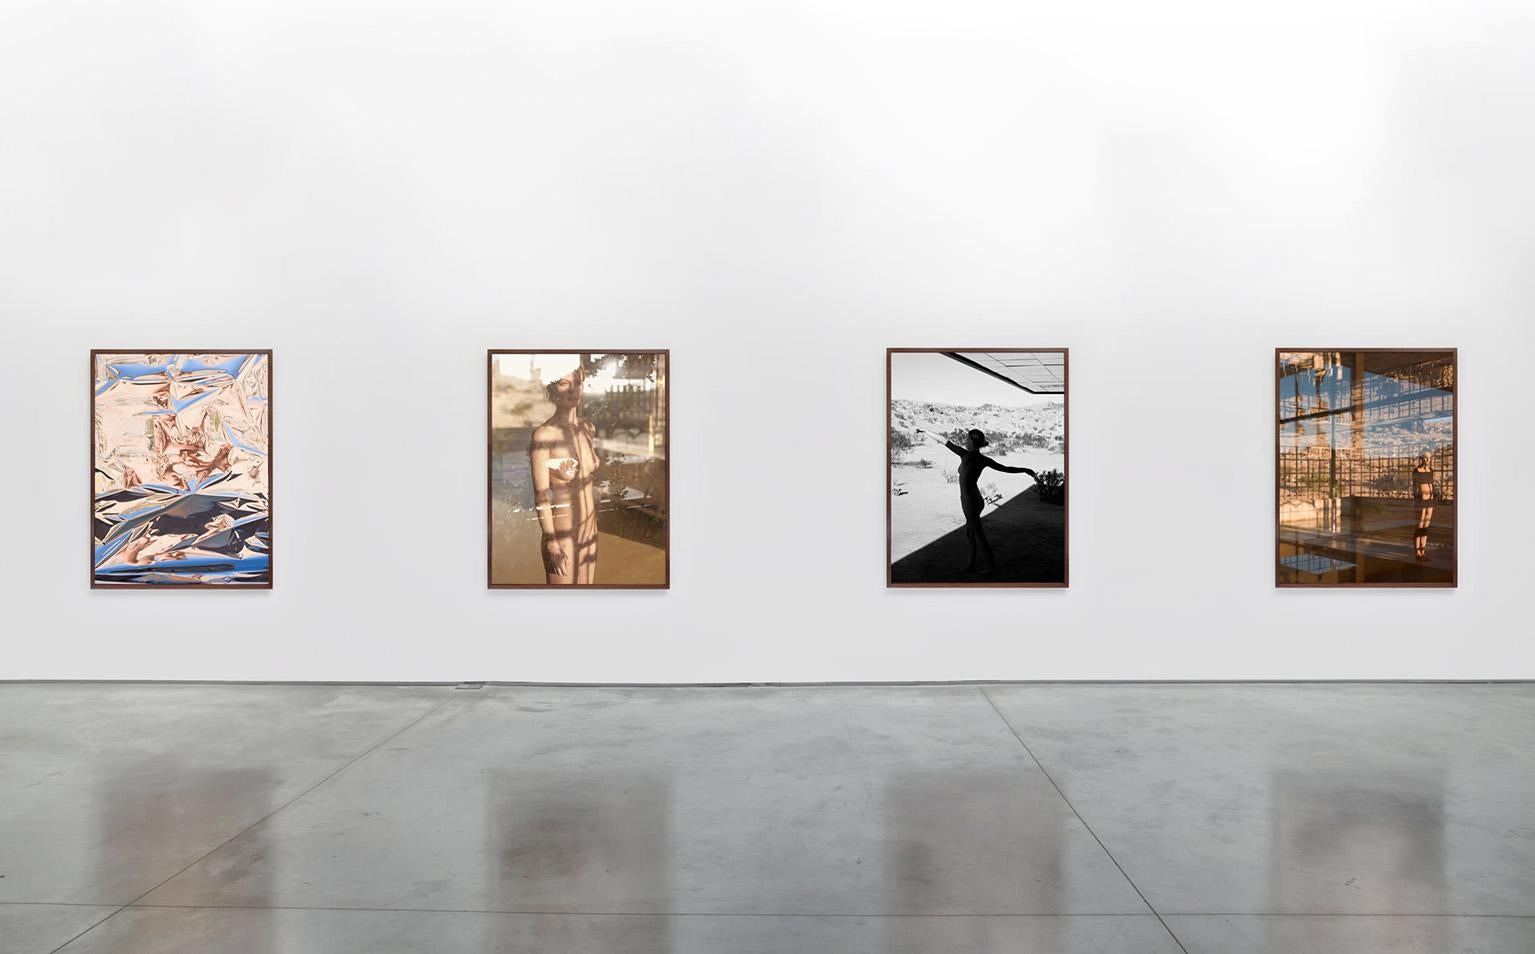 She Disappeared into Complete Silence (AD14507) - large abstract photograph - Photograph by Mona Kuhn